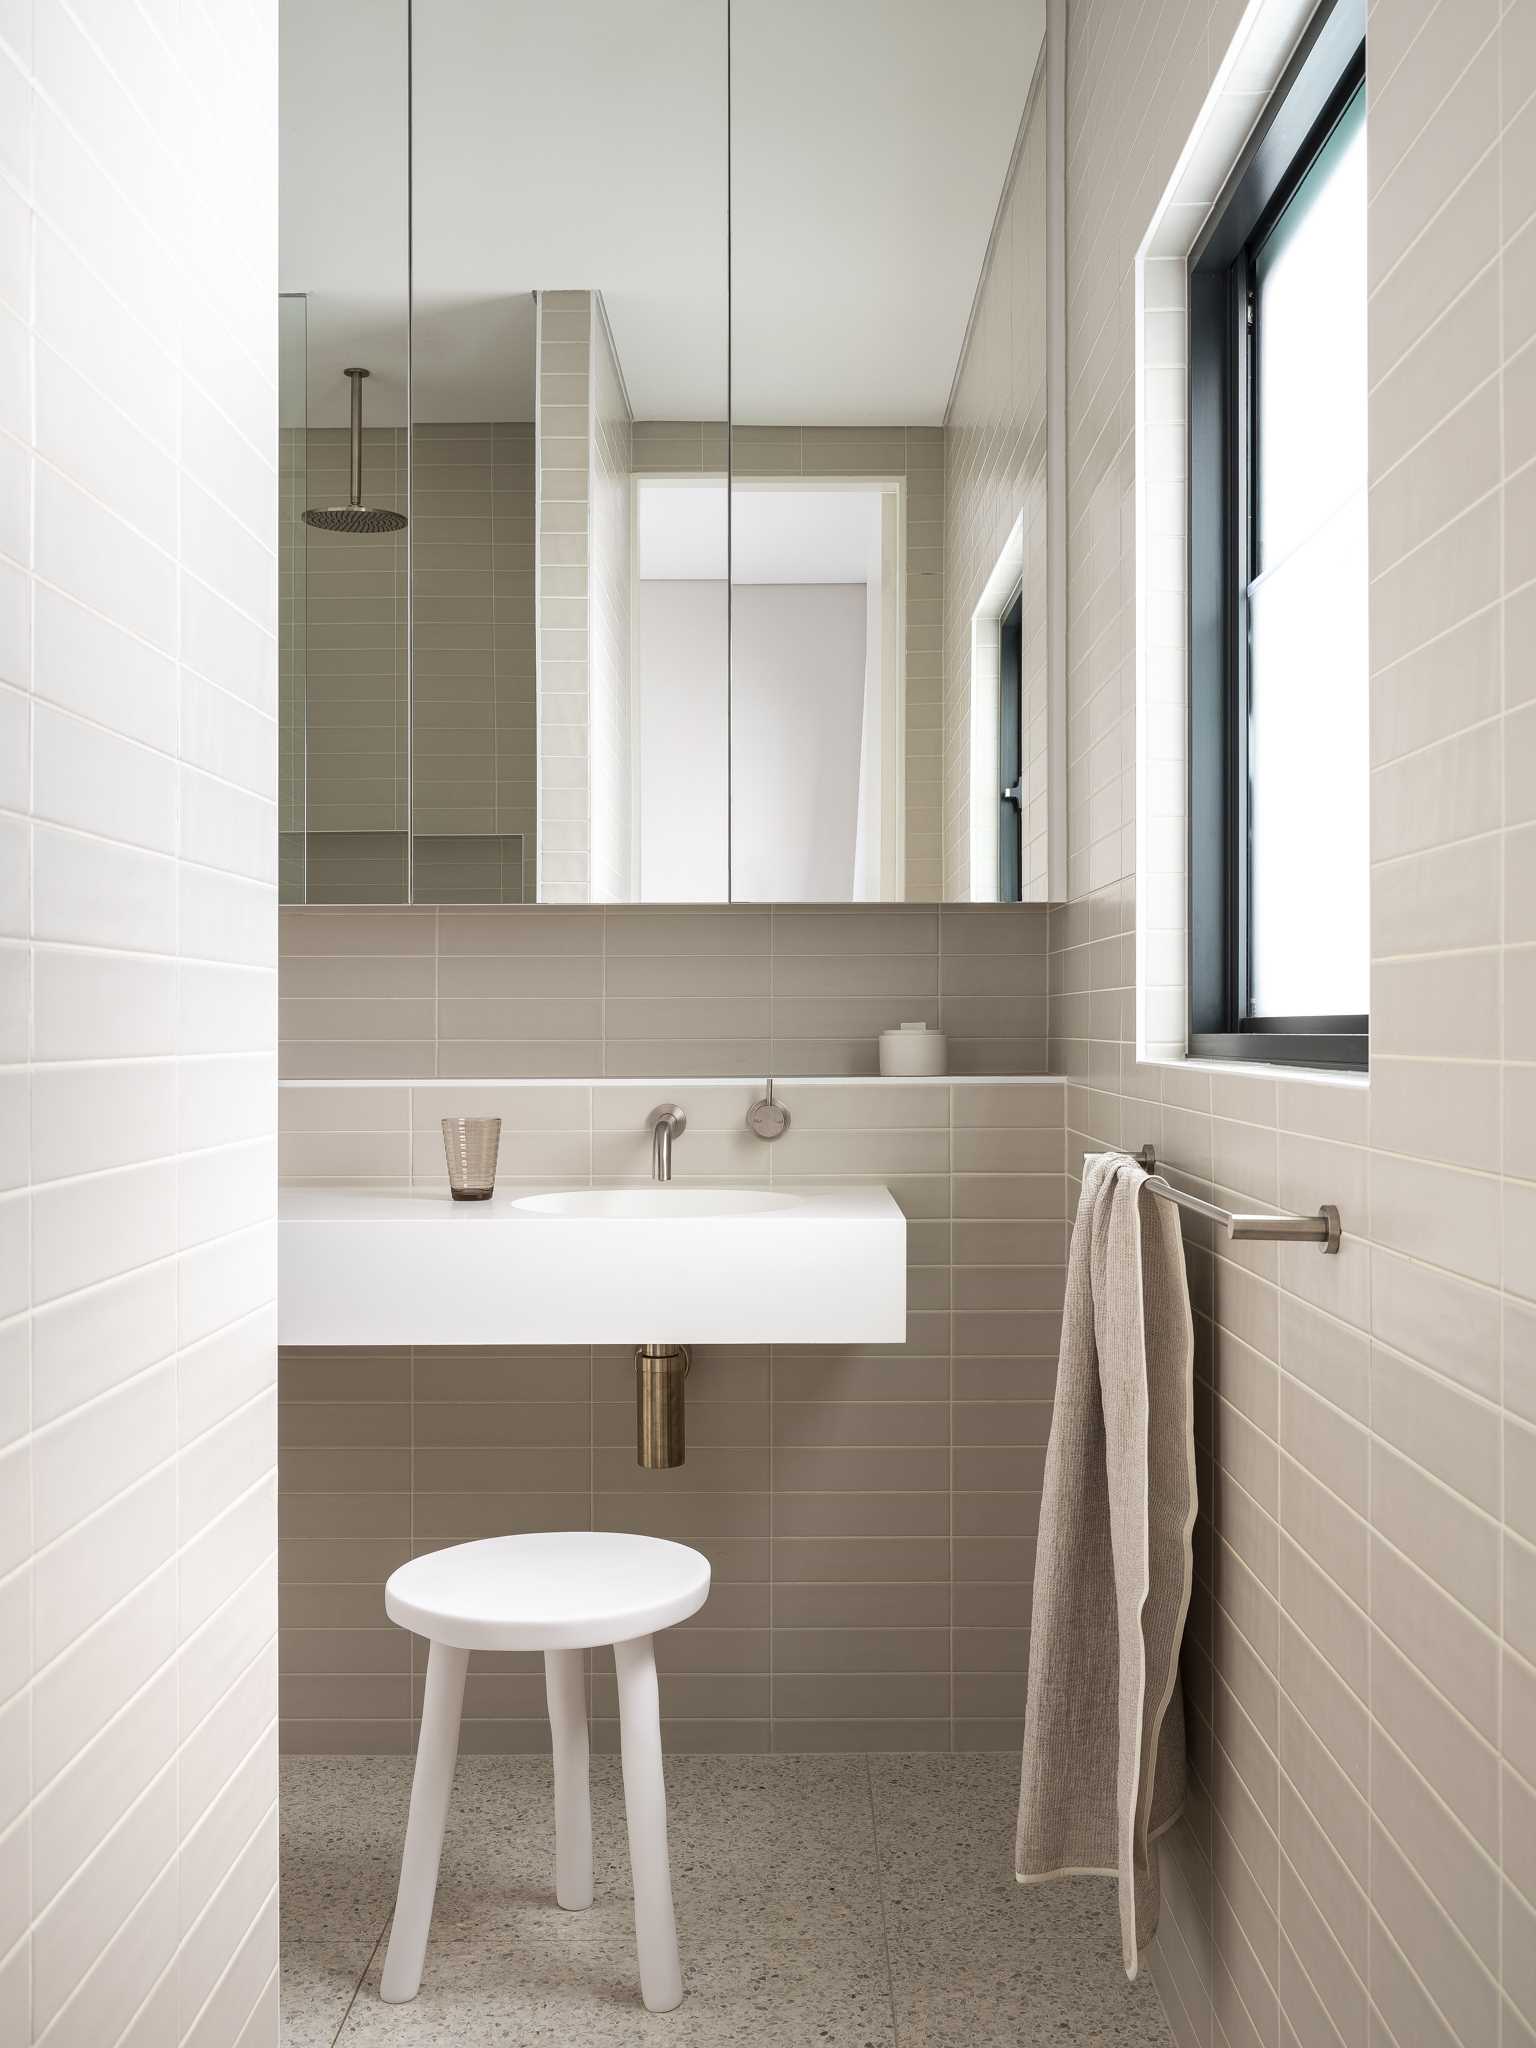 A modern bathroom with a natural color palette.